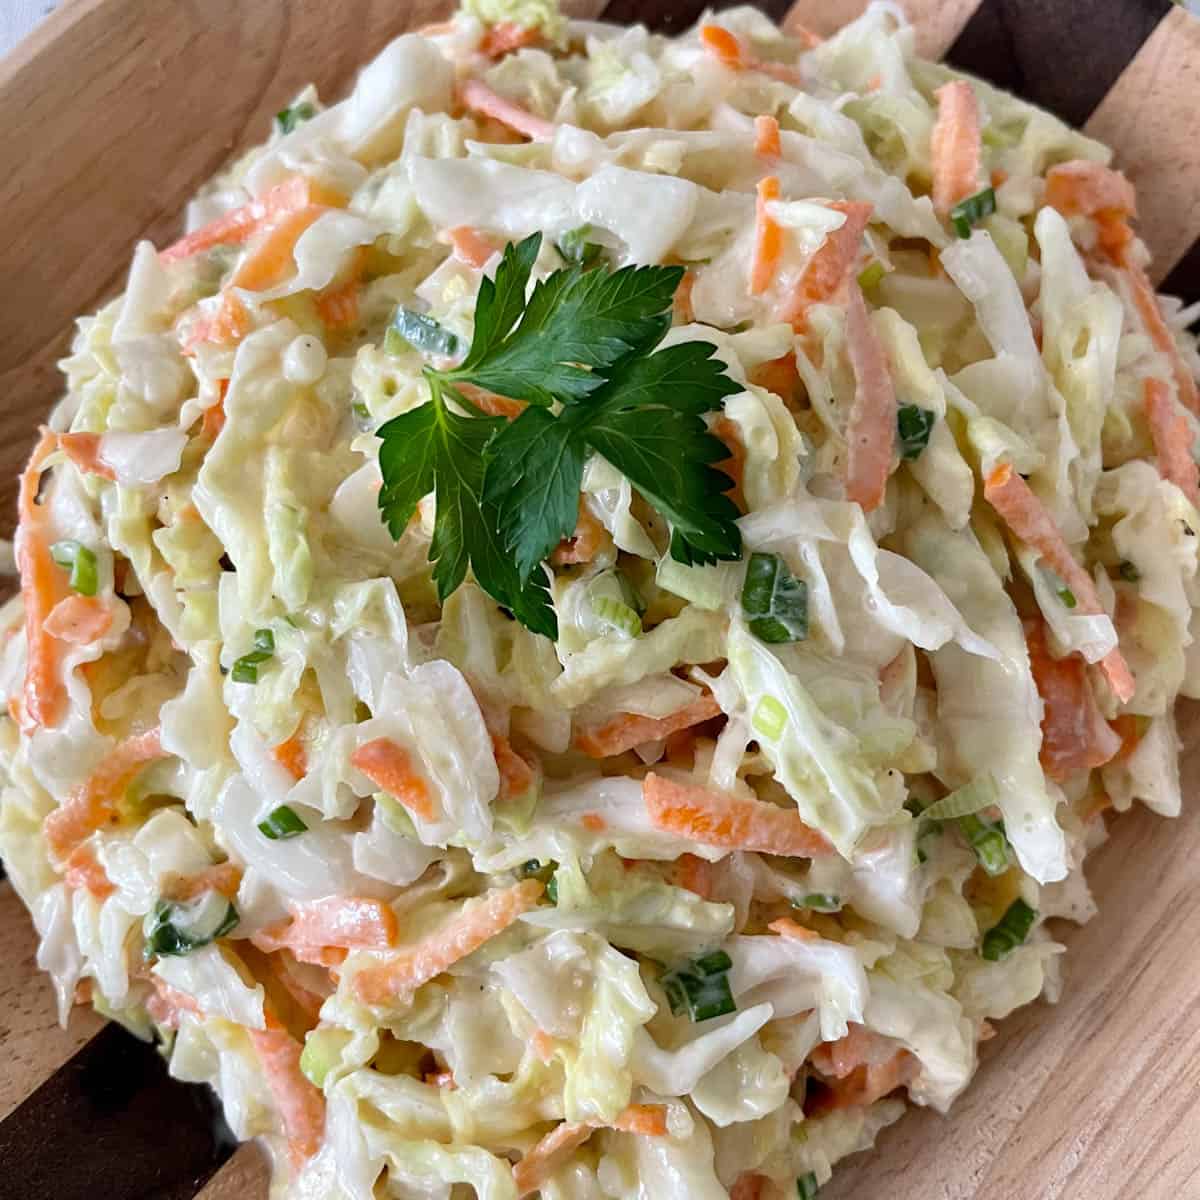 A bowl of coleslaw with cabbage, carrots, and green onions.